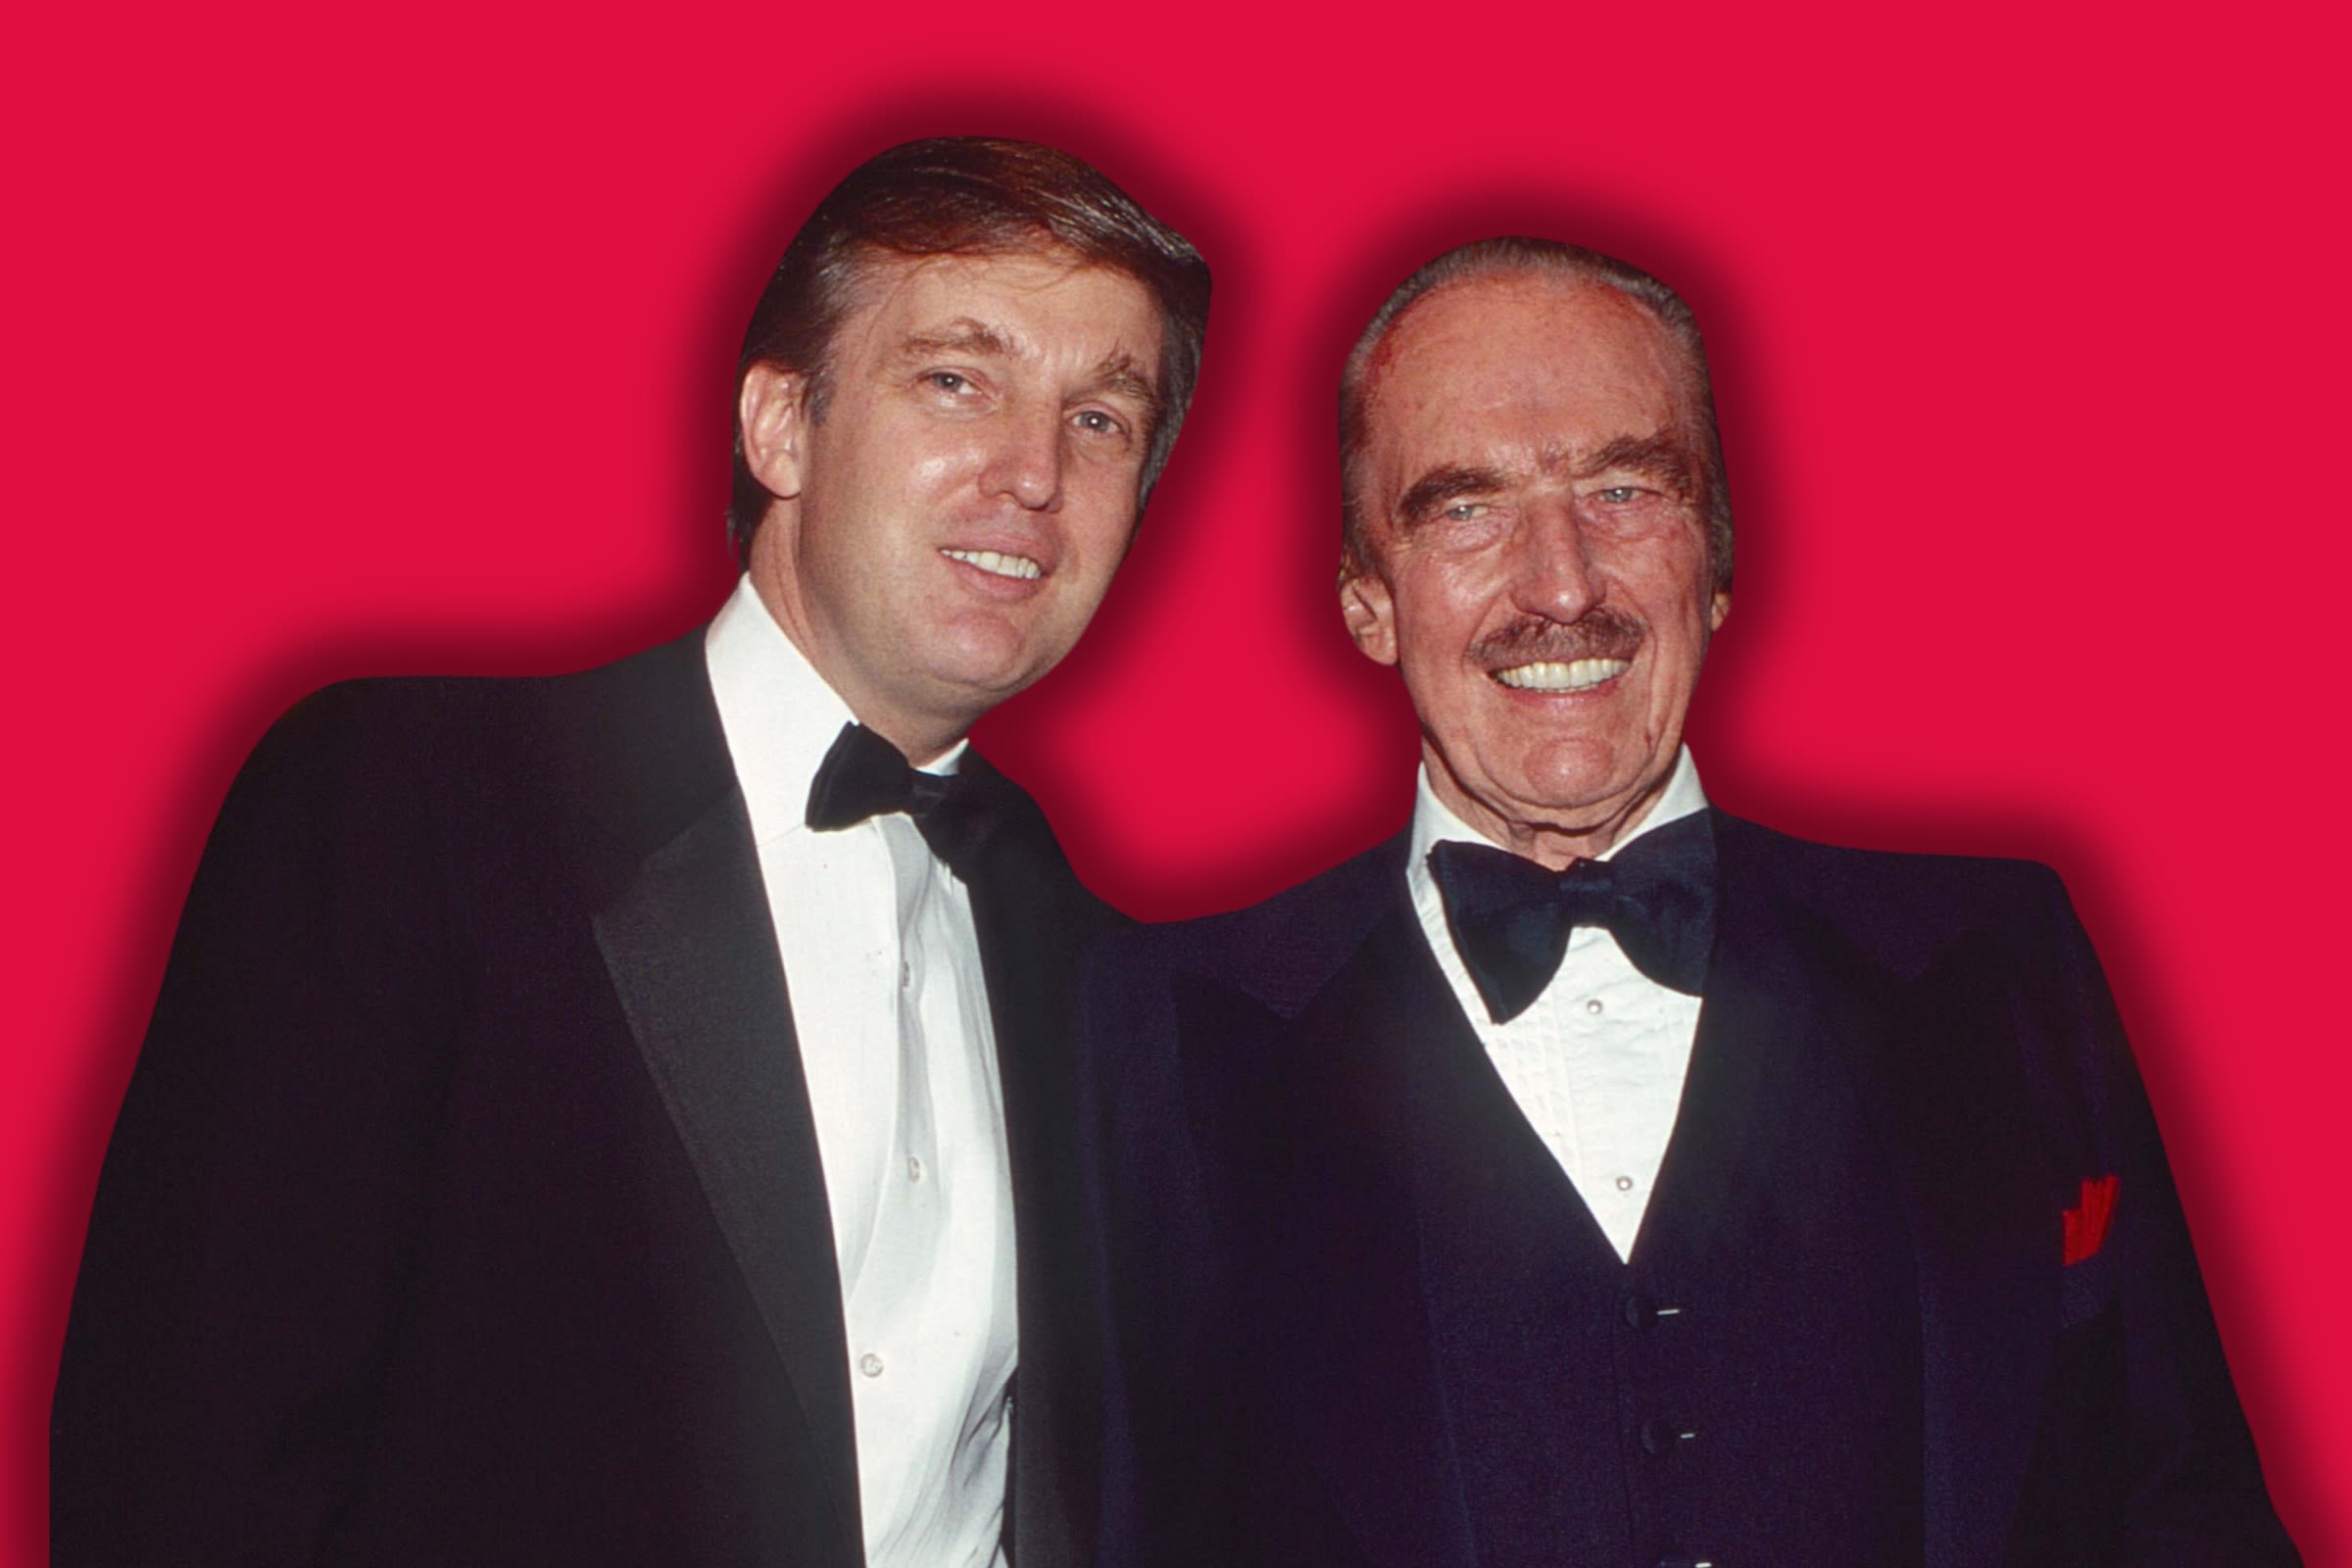 Donald Trump grew up needing father's approval, says niece: "Insecure man"